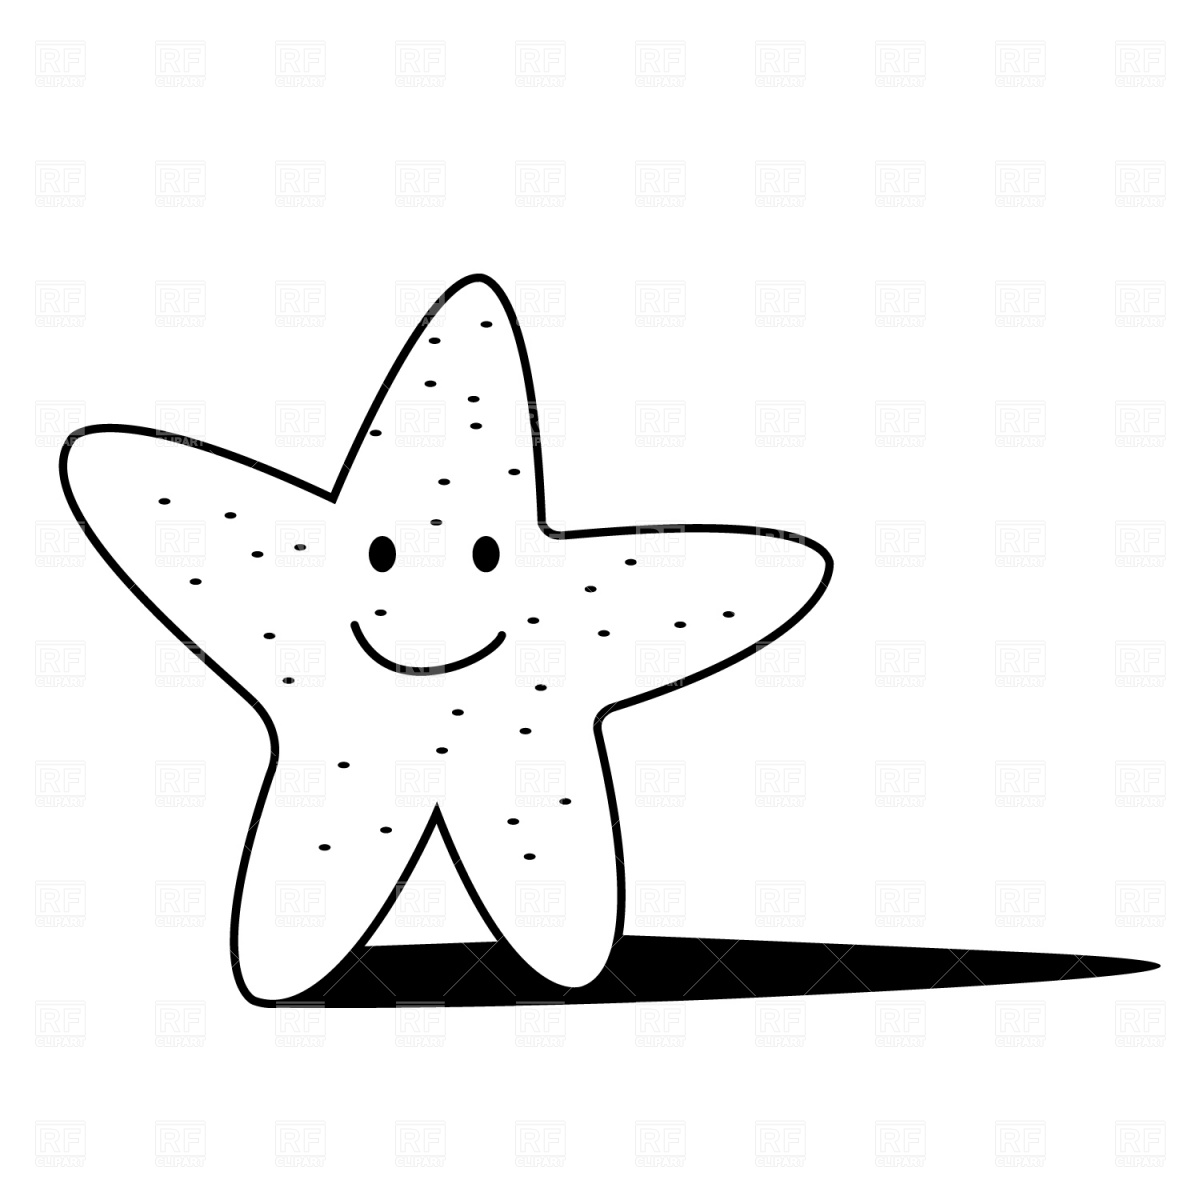 Starfish Clipart Black And White   Clipart Panda   Free Clipart Images